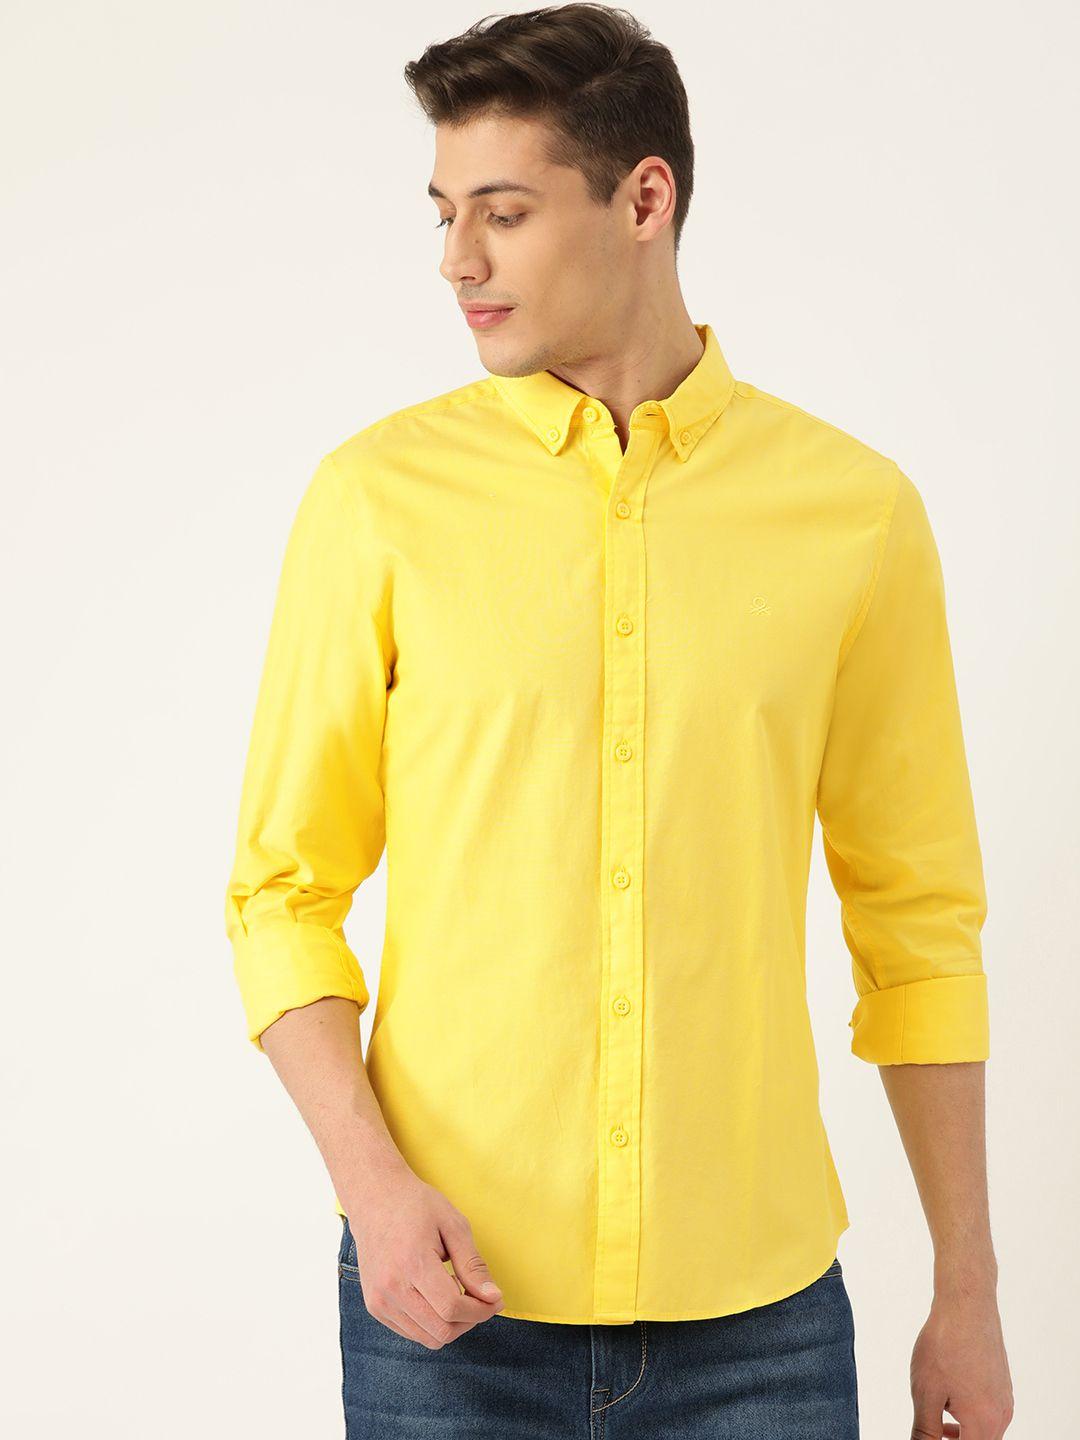 united colors of benetton men yellow oxford woven slim fit solid casual shirt